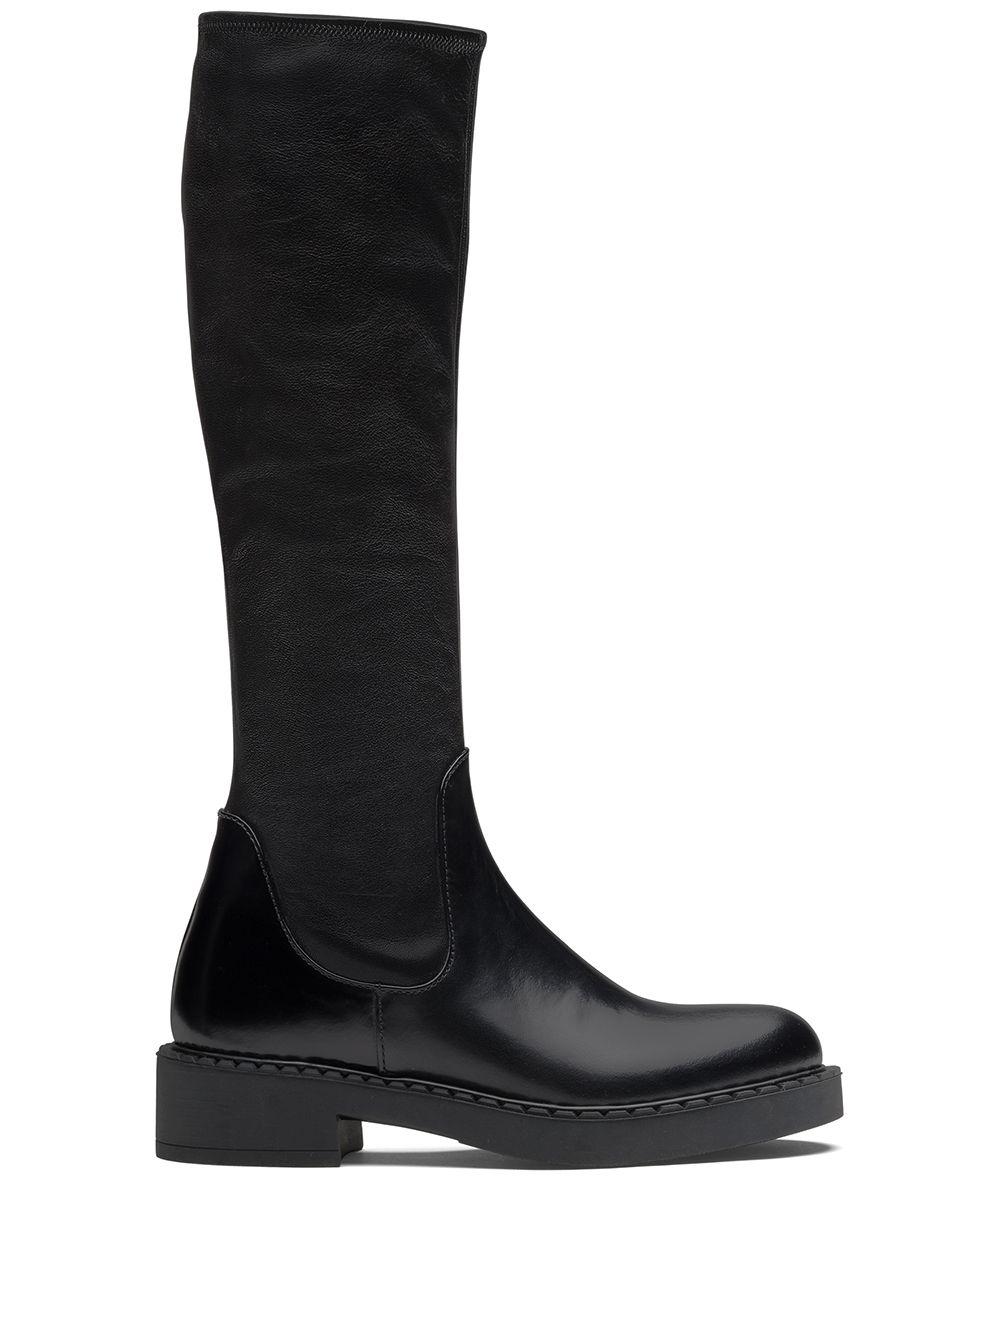 Prada Leather Knee-high Boots in Black - Lyst